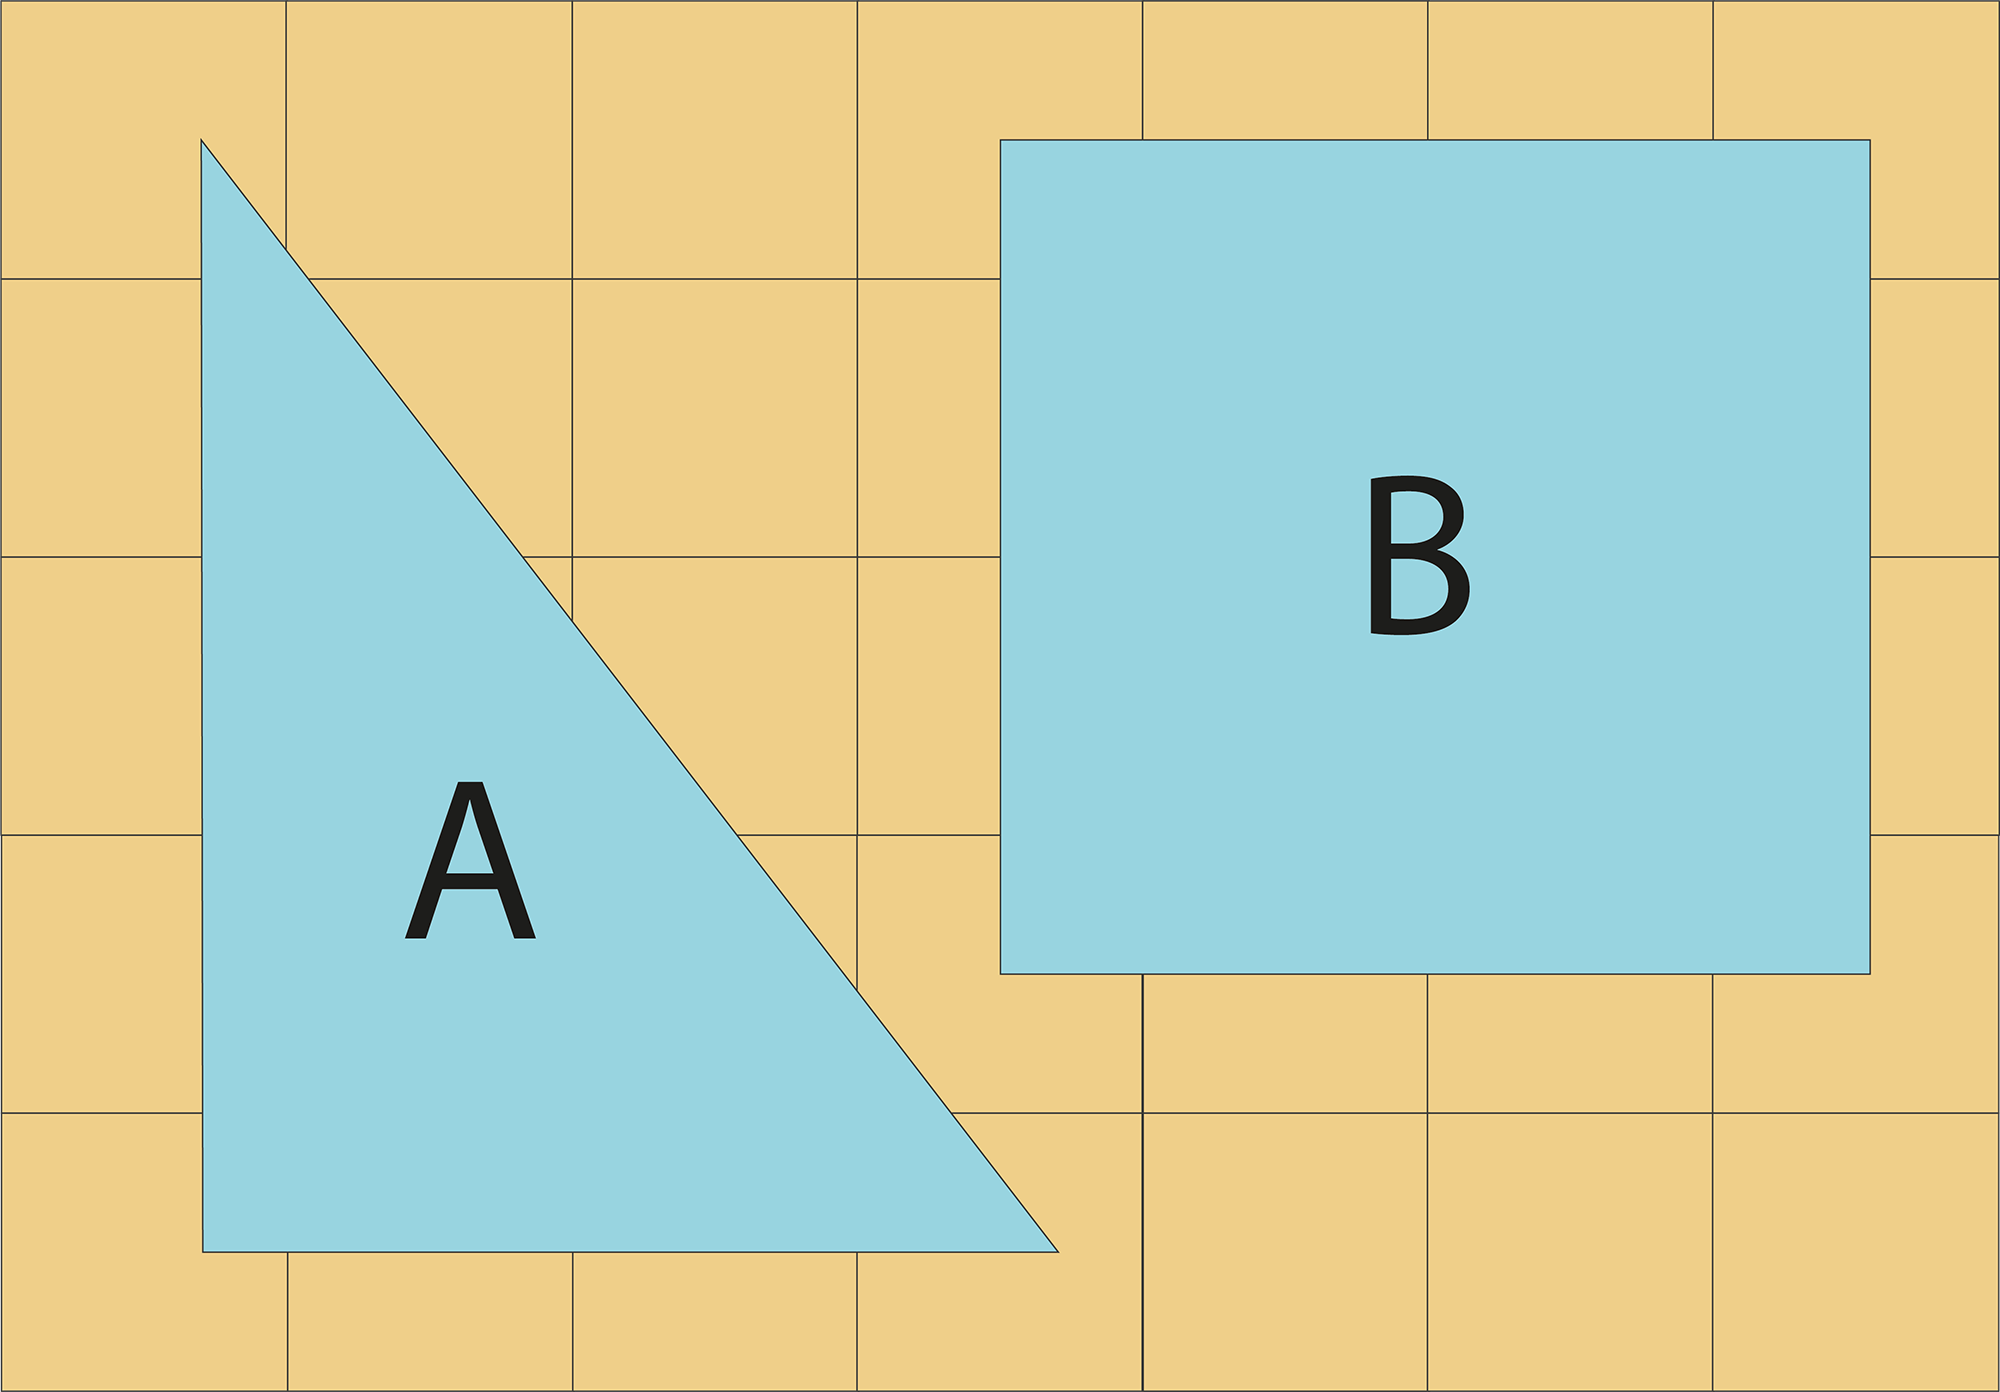 Figure of each square is of side 1 cm